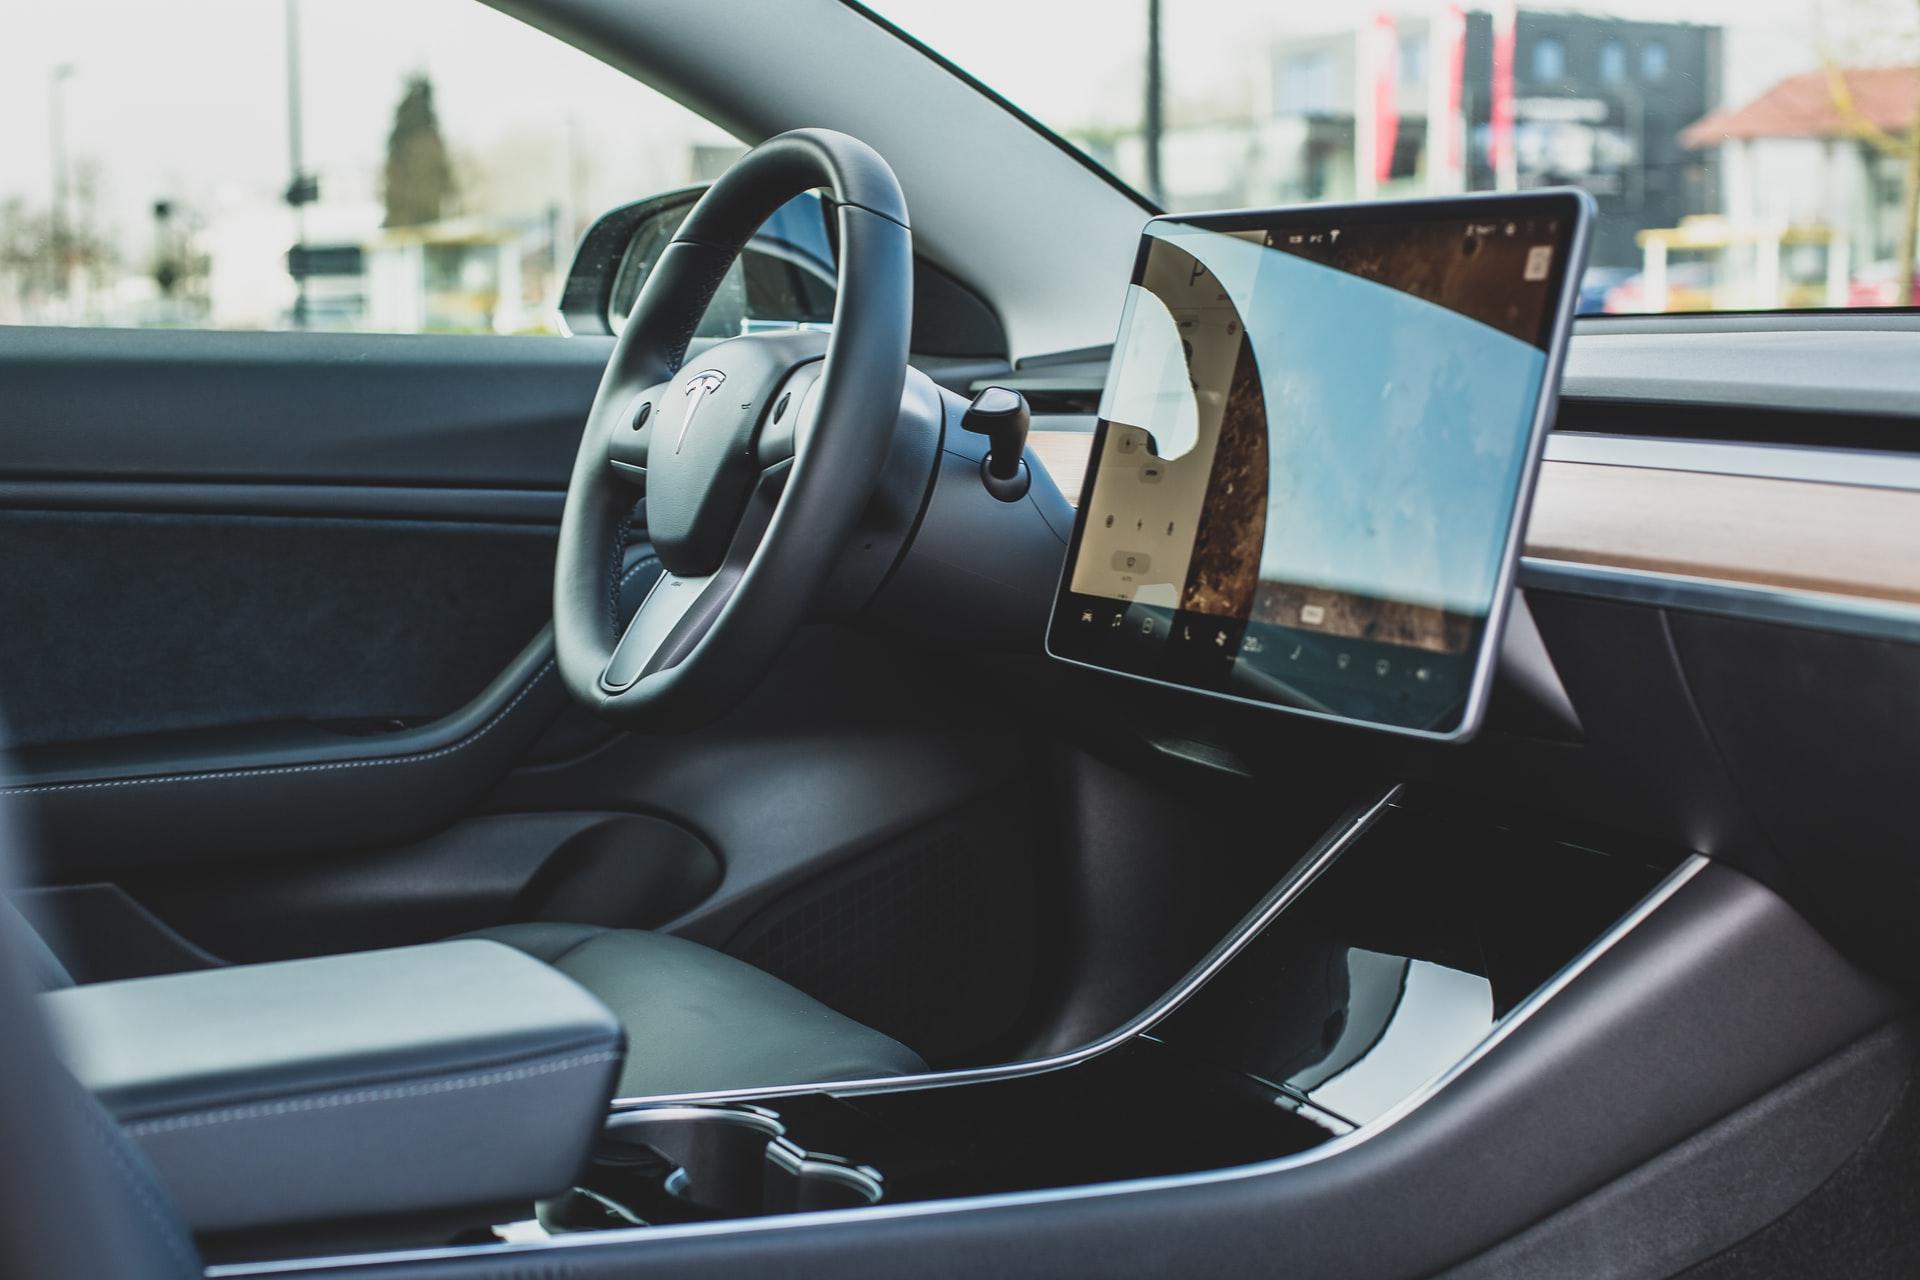 If you own a Telsa, there’s a new update arriving to enhance self-driving capabilities.